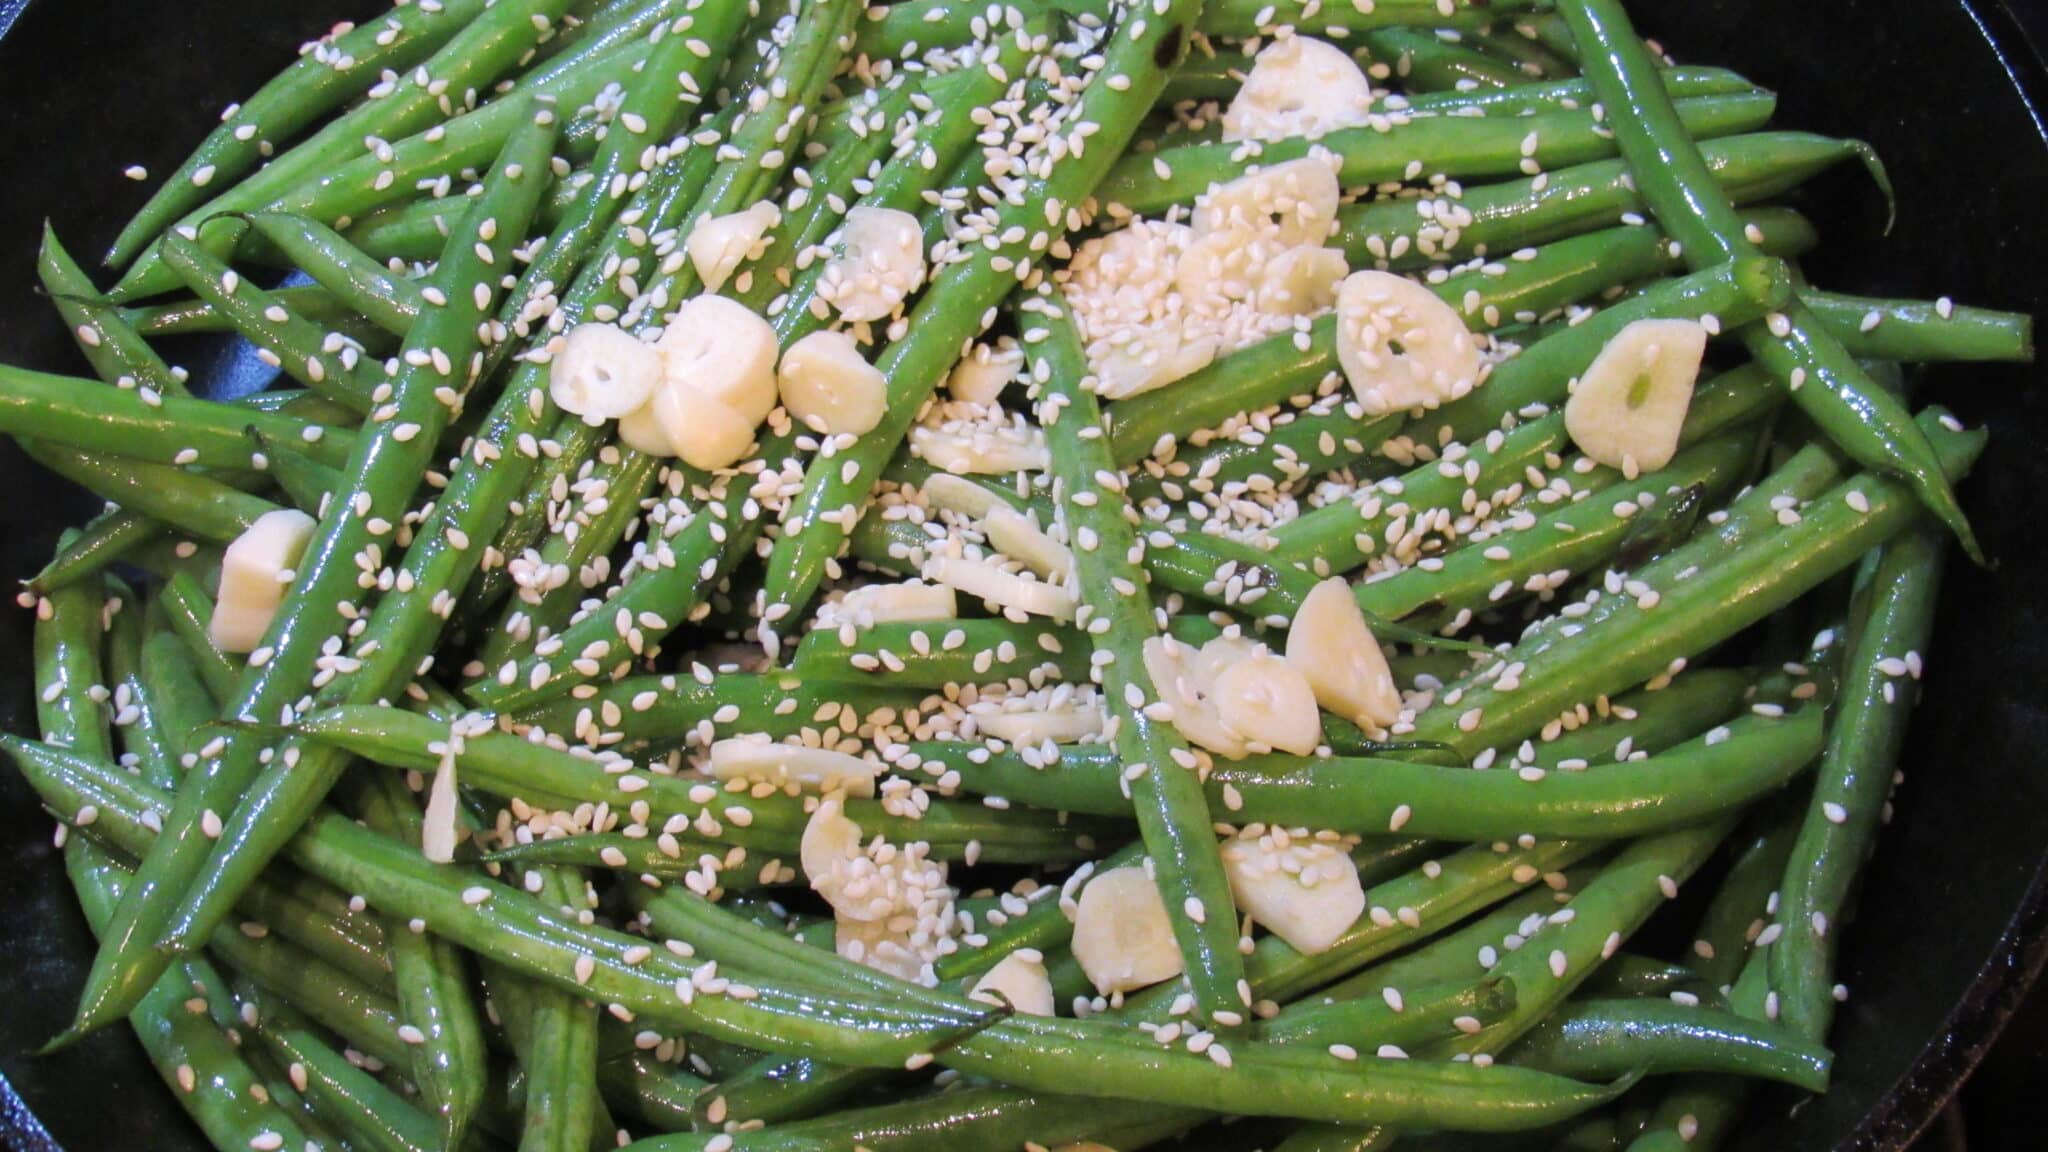 Chopped garlic and sesame seeds are added to the green beans.